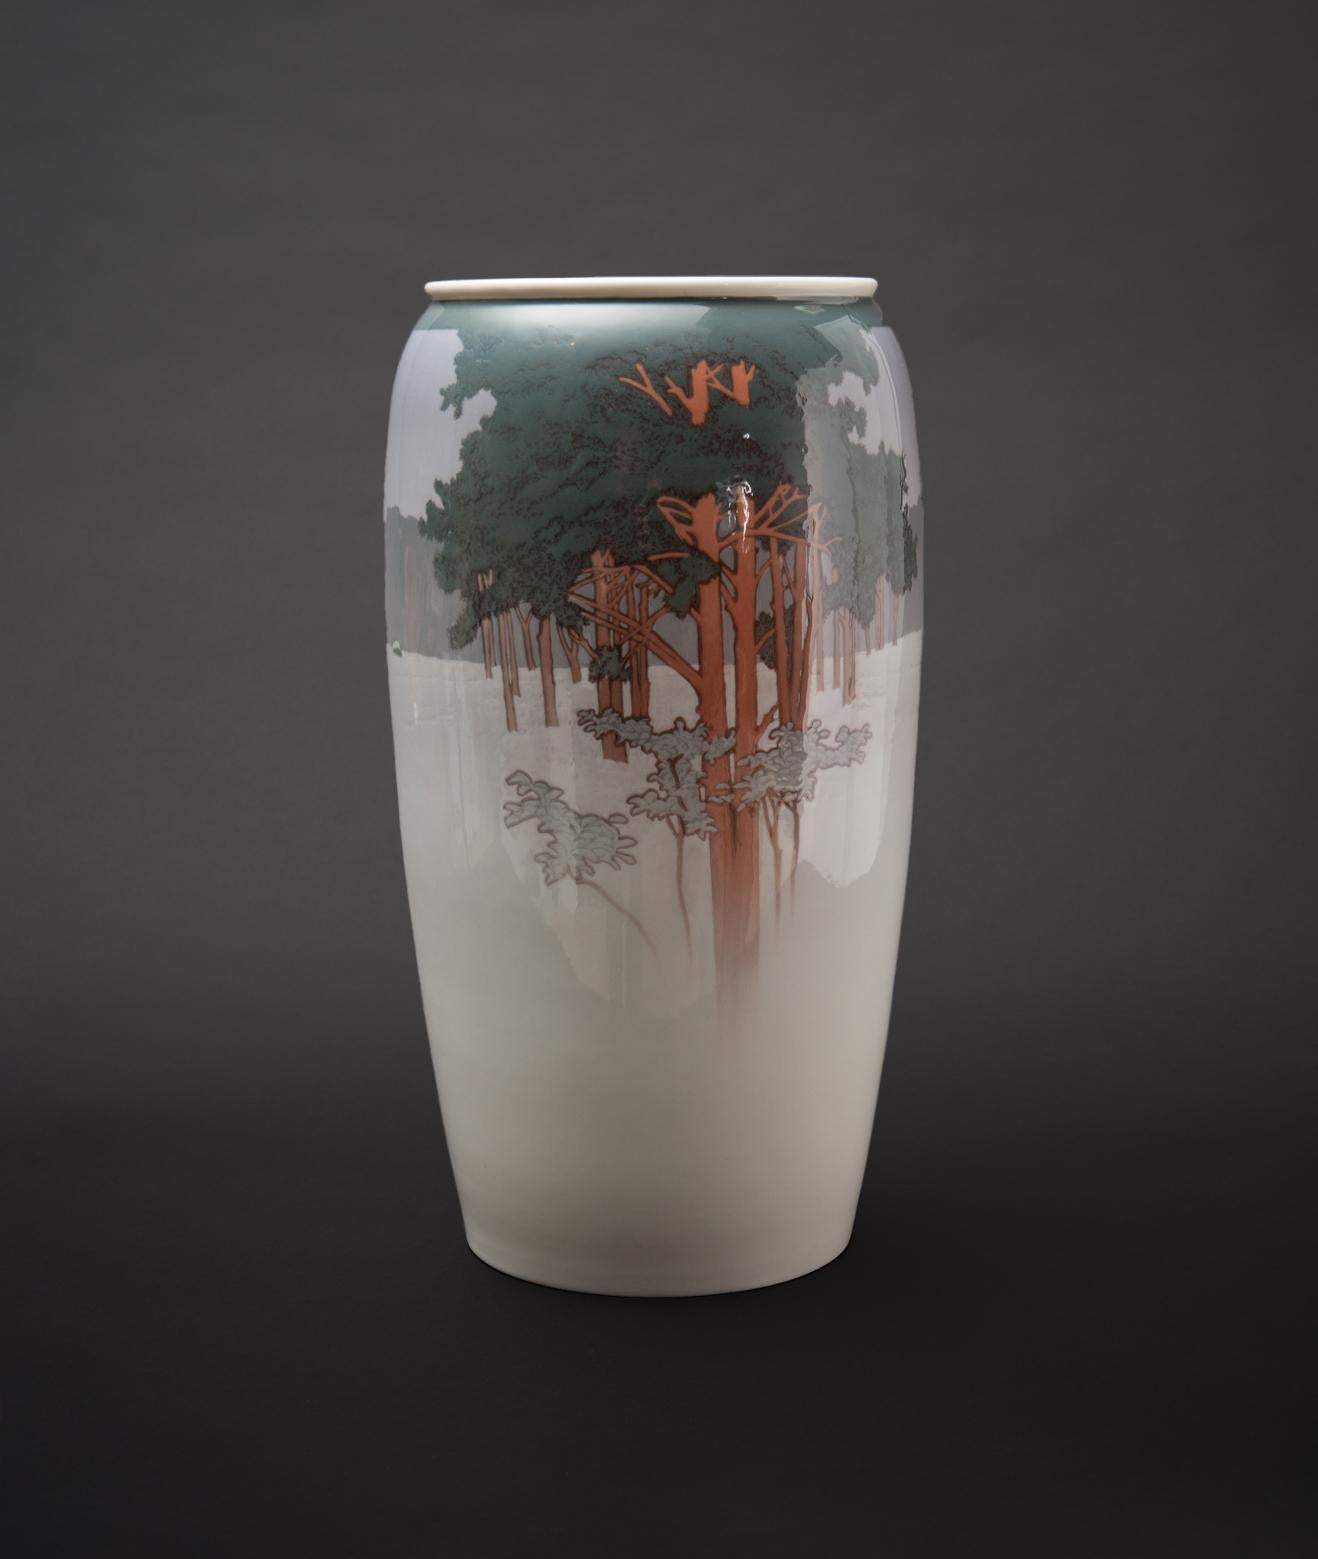 Theodor Hermann Schmuz-Baudiss for Konigliche Porzellan-Manufaktur.

This monumental vase features a winter landscape at the edge of a forest. A stunning example of this artist's work.